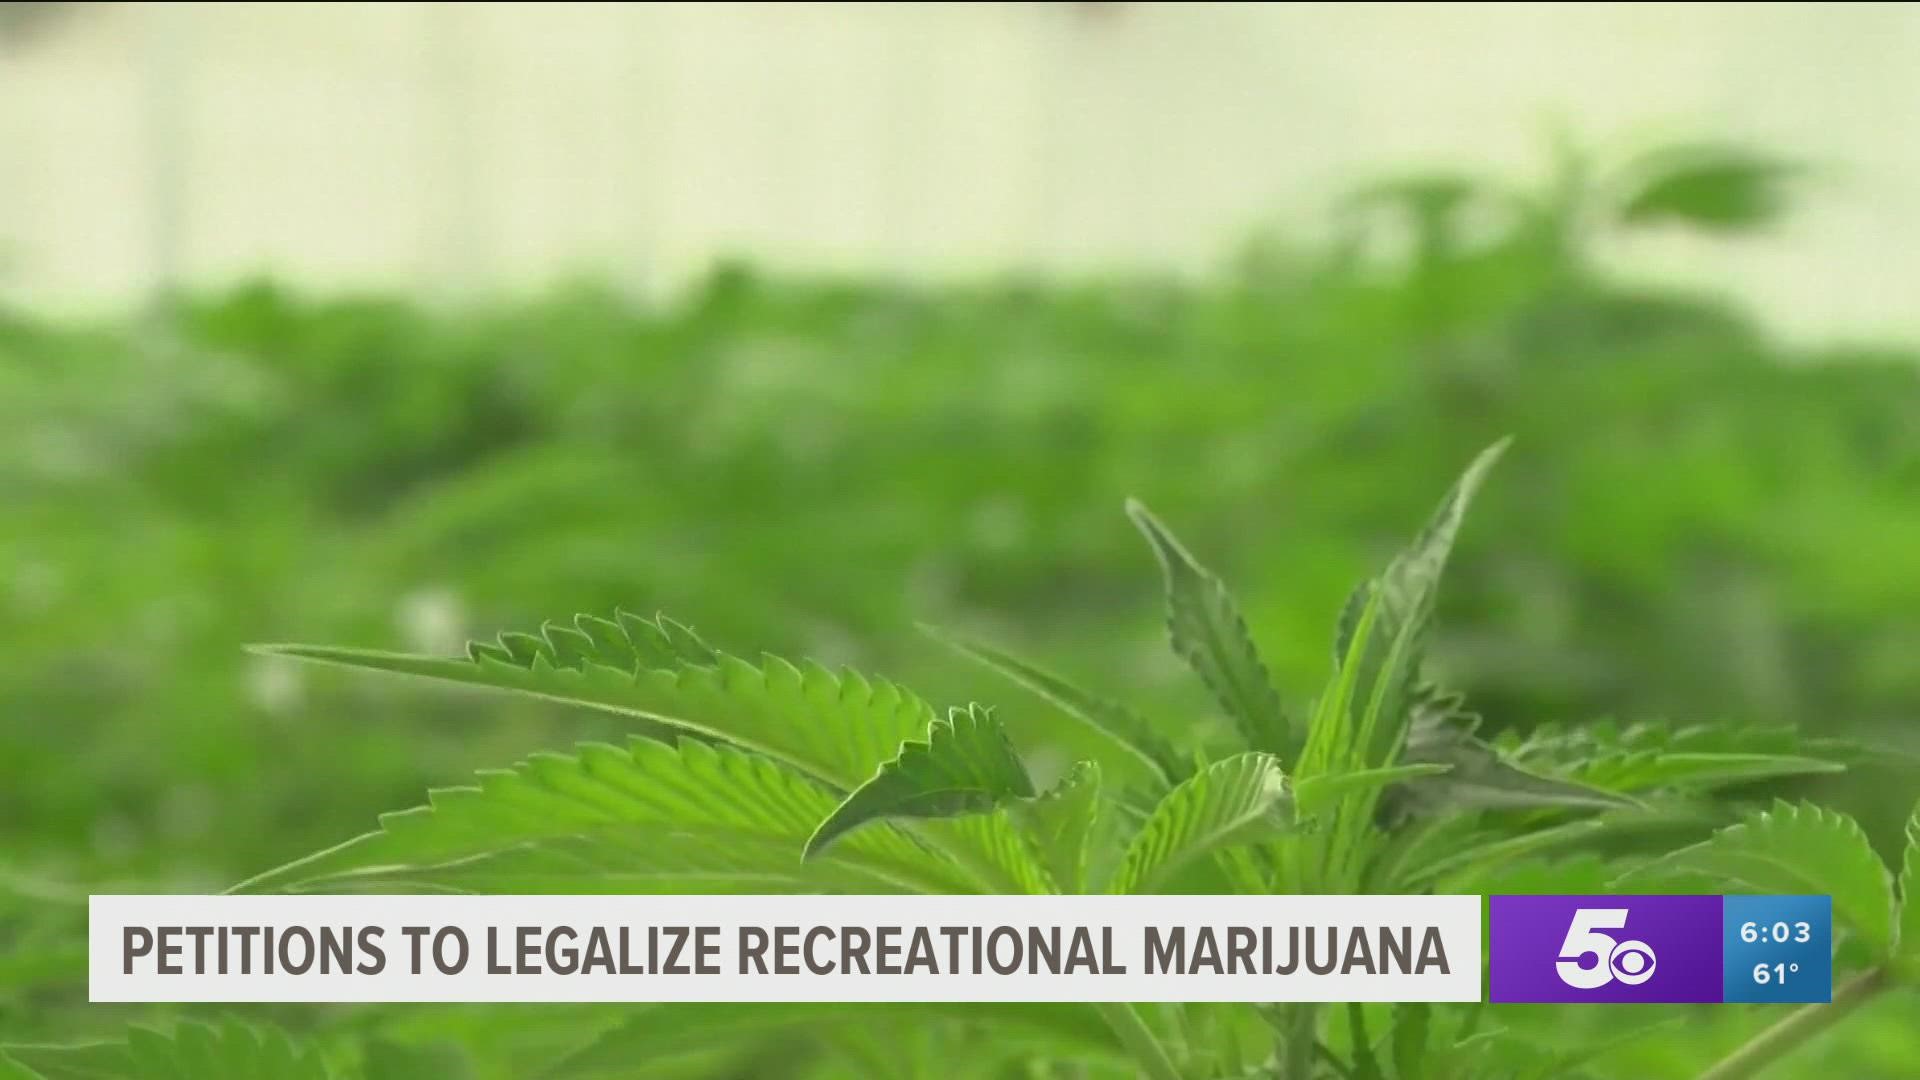 There are two petitions filed in Arkansas to make recreational marijuana legal.